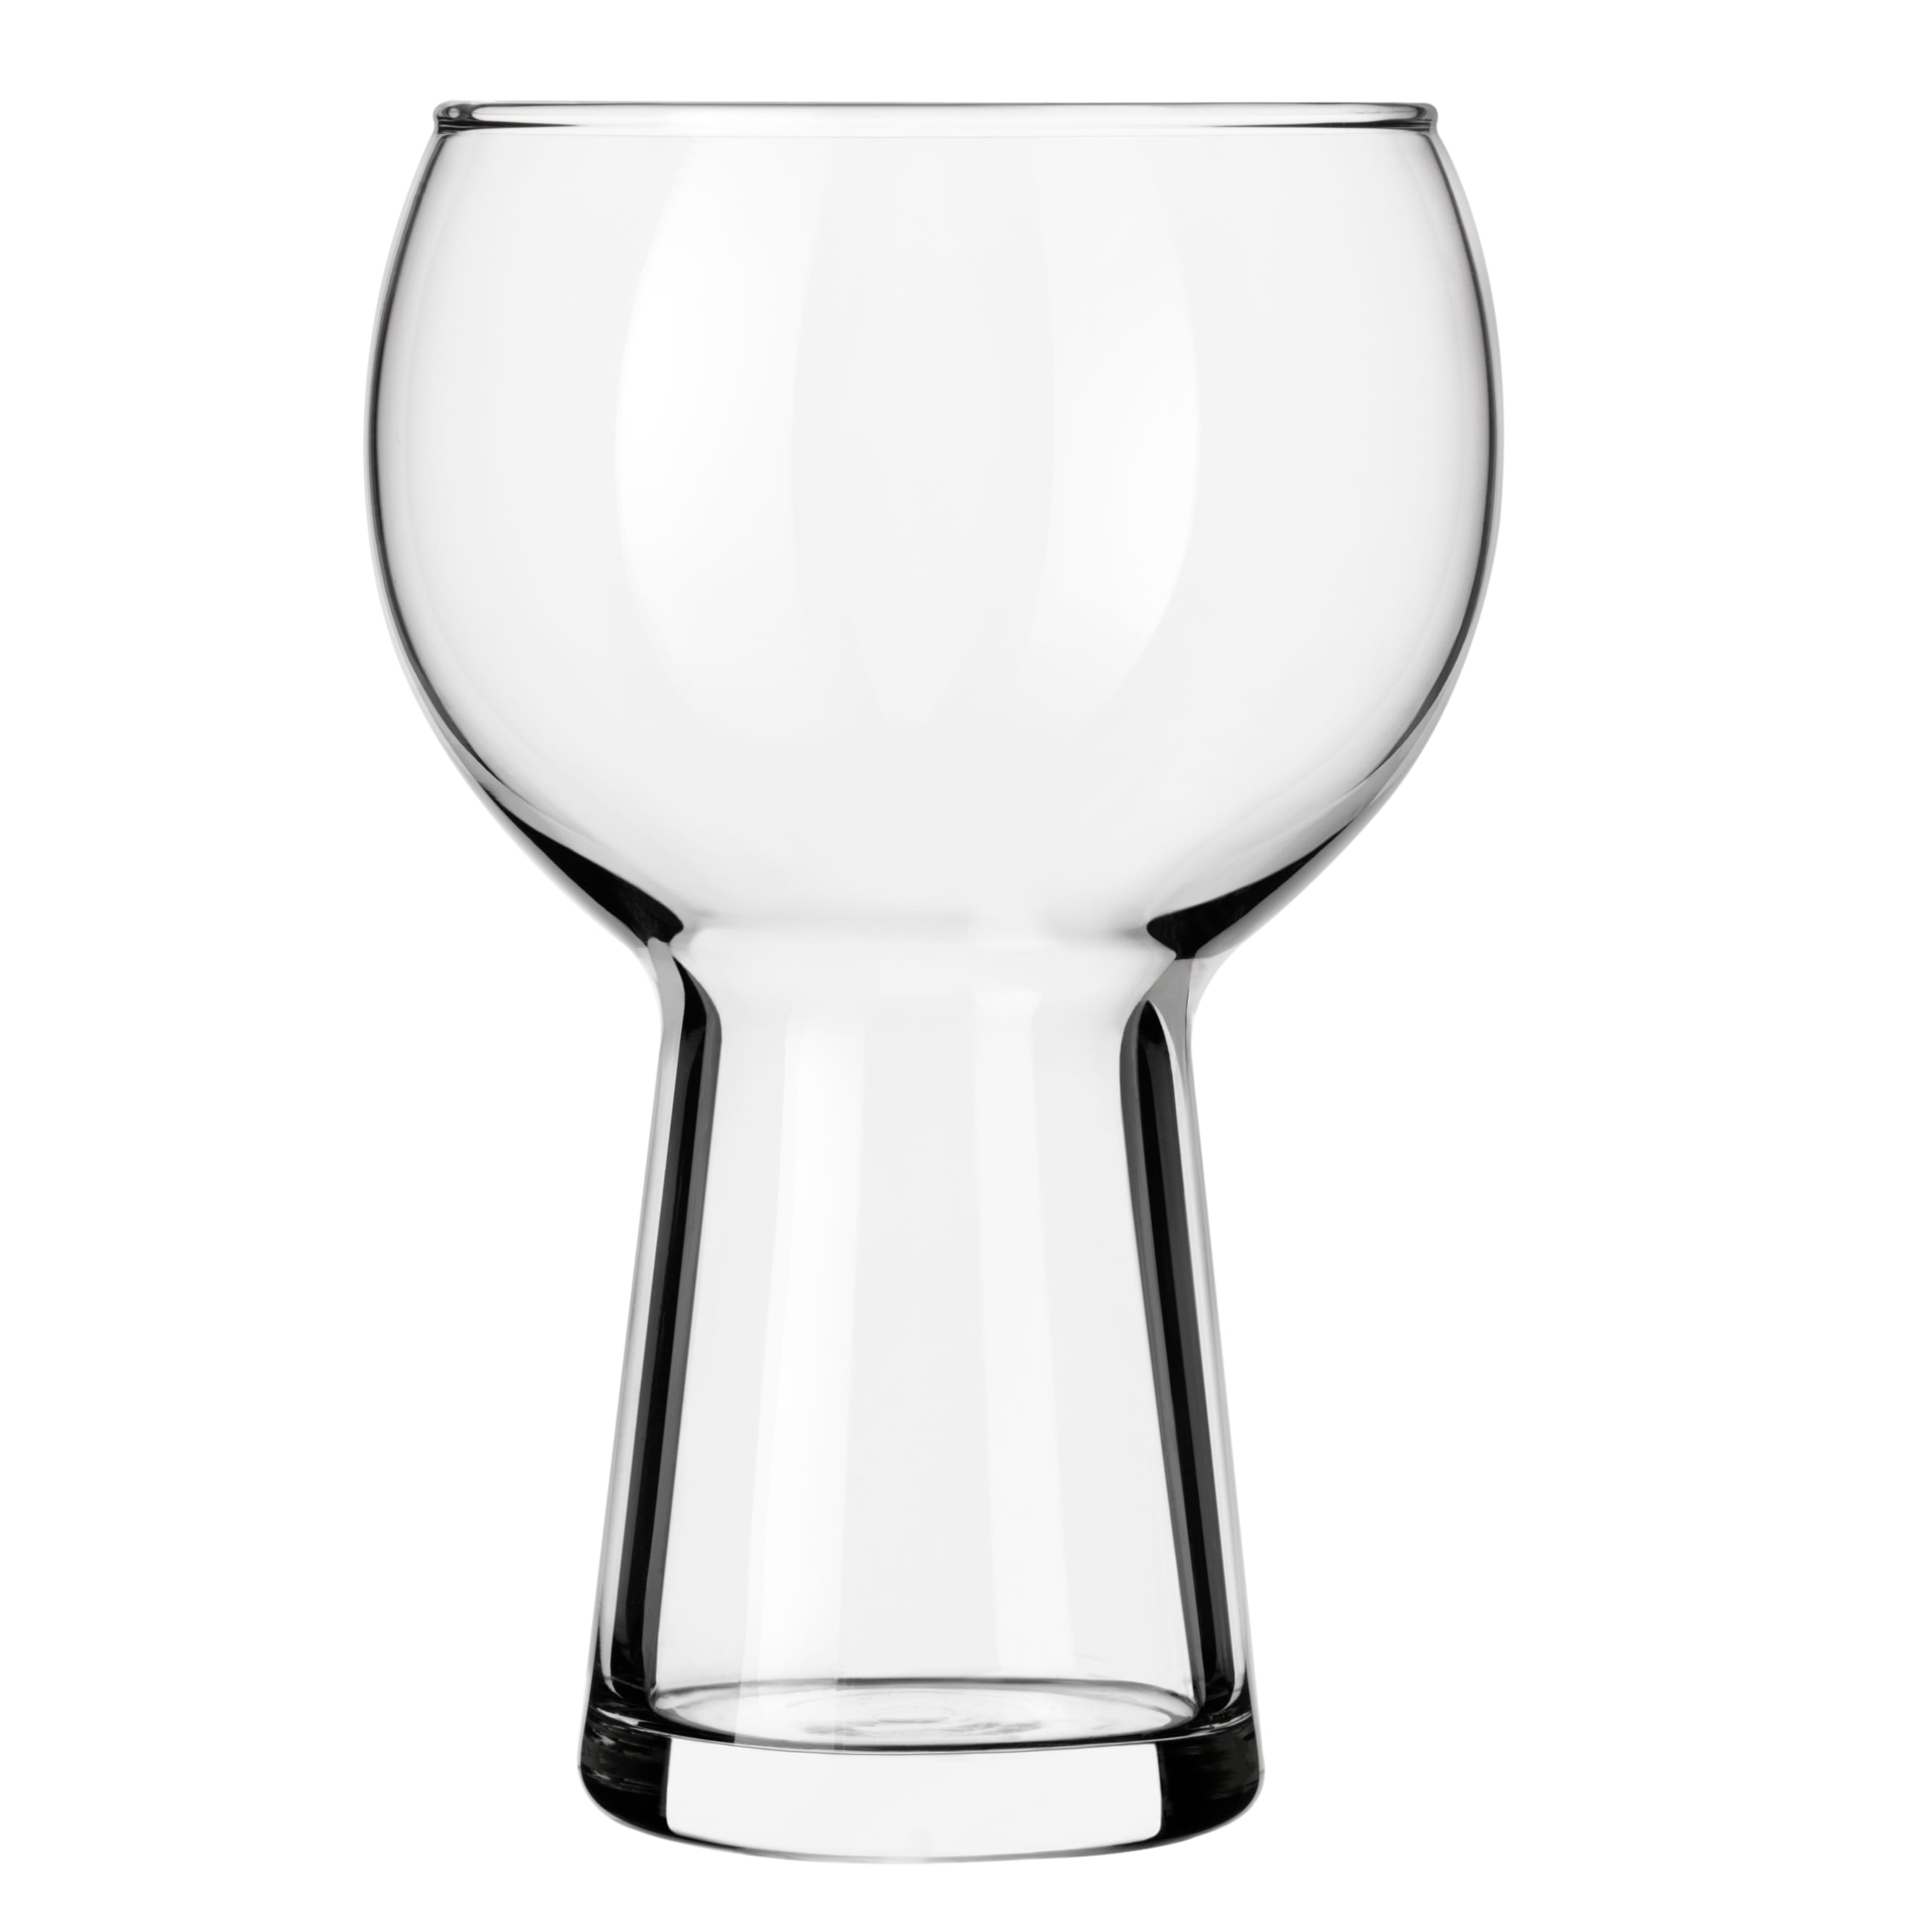 Libbey 1104 Symbio Gin and Tonic Glass, 16 Ounce, Clear